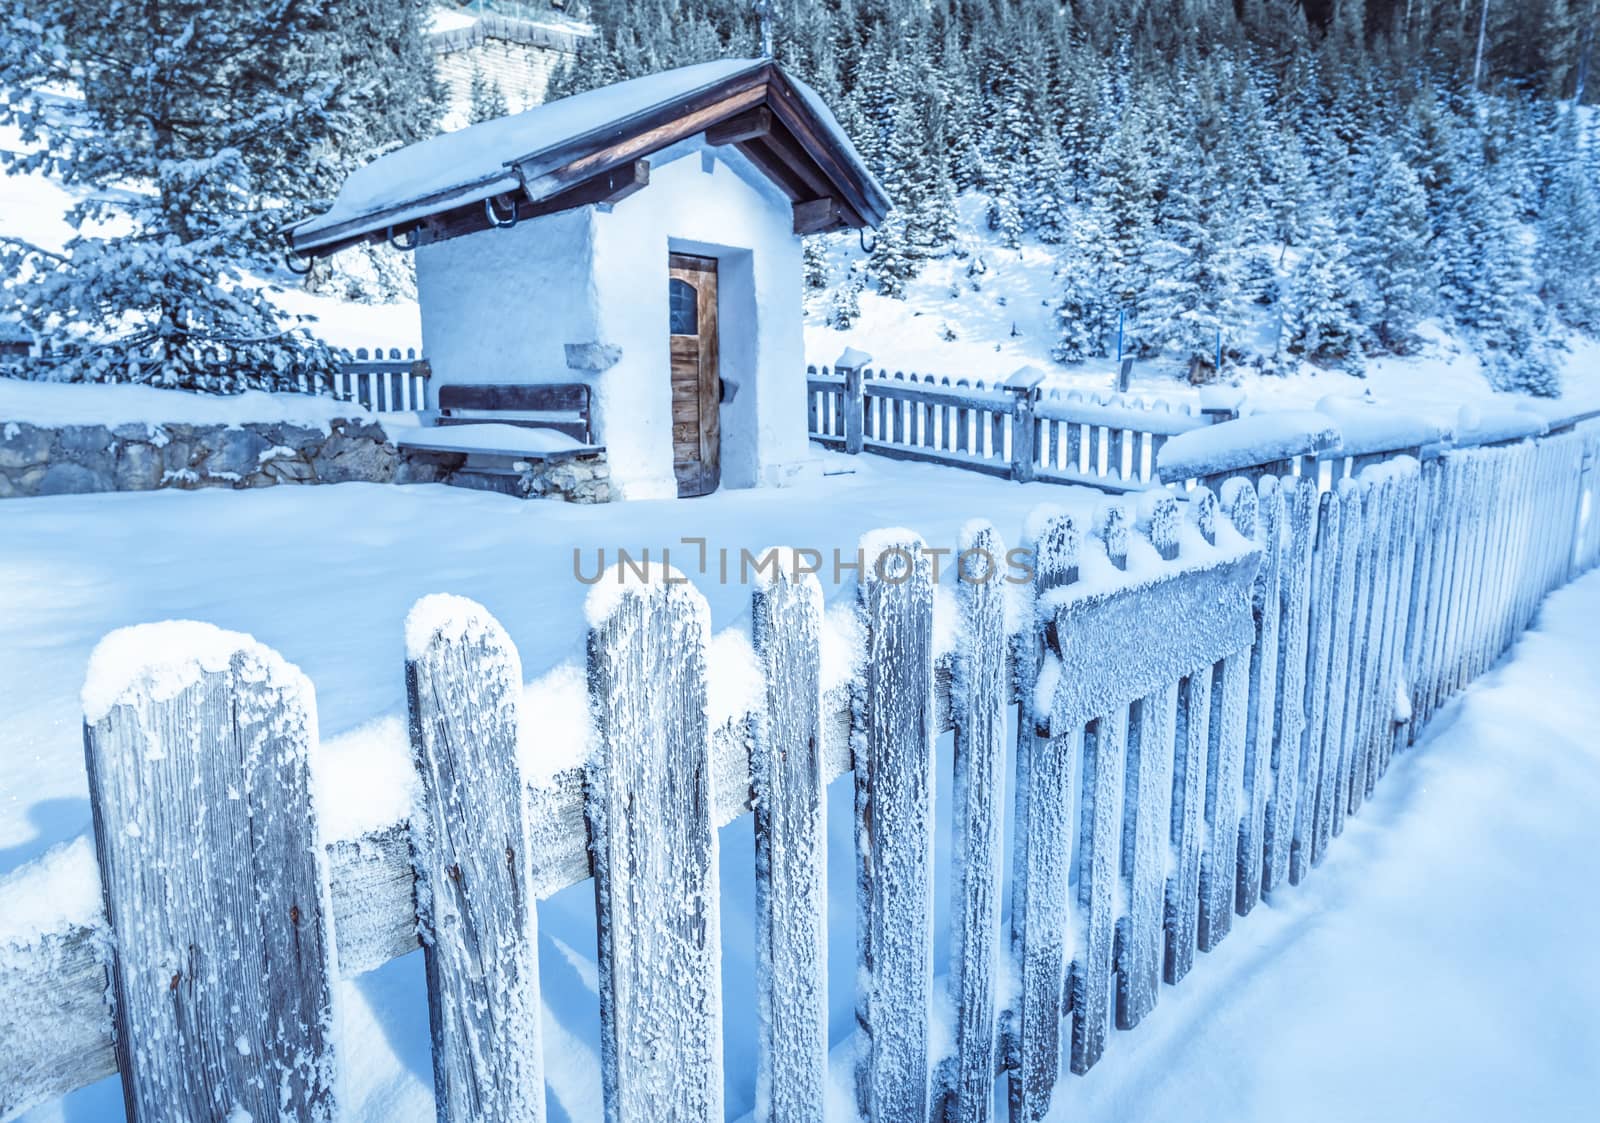 Winter idyllic scenery with an old wooden fence covered by snow, which surrounds a rustic alpine chapel, in the Austrian Alps. Image taken in Ehrwald, Austria.